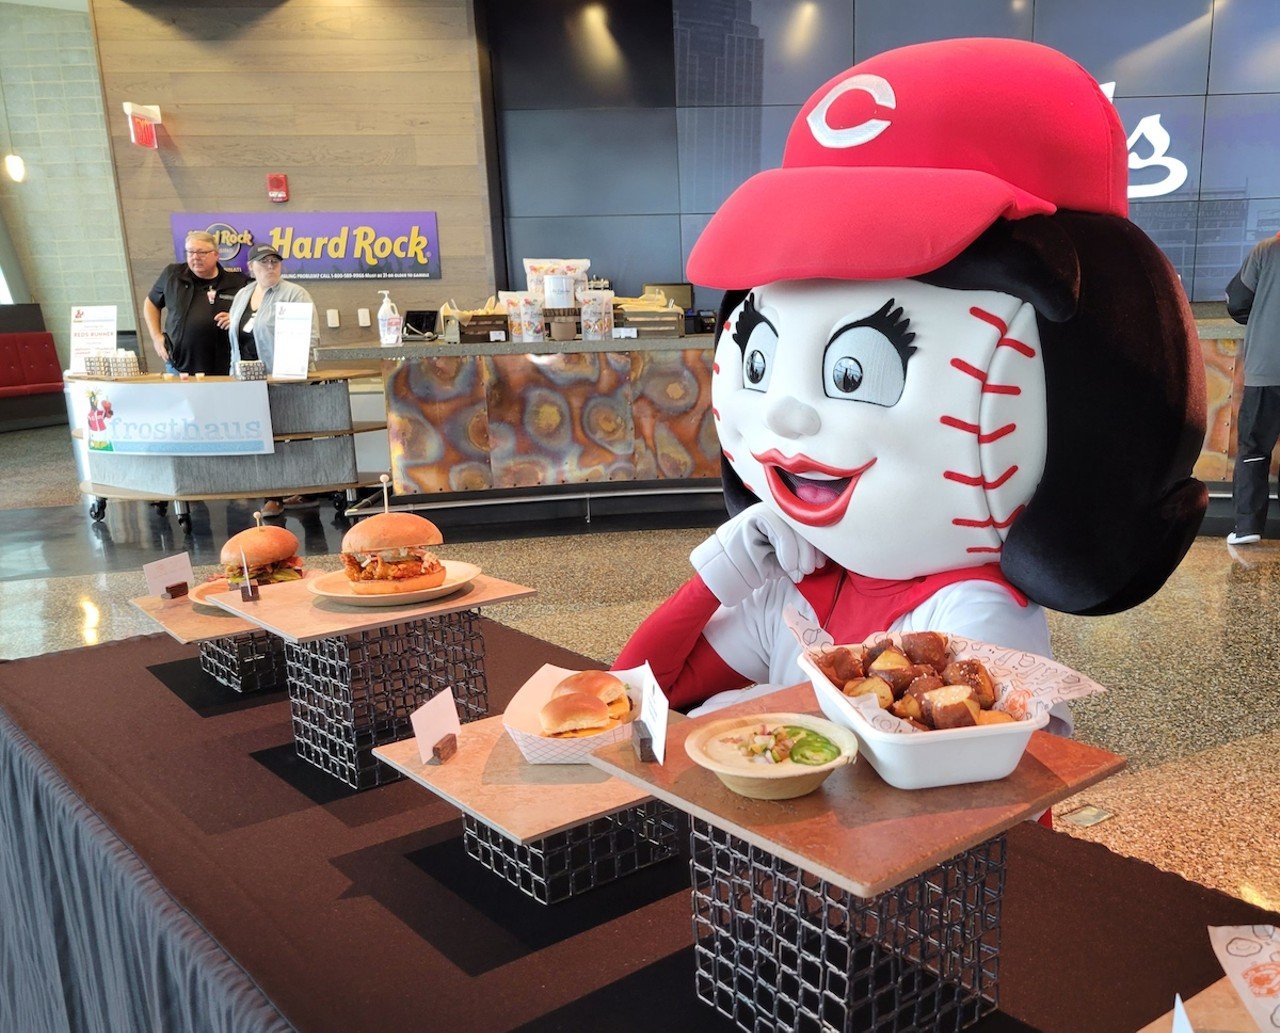 Catch a Reds Game and Chow Down on a Vegetarian Hotdog
100 Joe Nuxhall Way, The Banks
Great American Ball Park debuted a slate of new snacks for the 2022 season — even some elevated fare made especially for vegetarians. The new menu includes two veg-friendly hot dogs: the Lookout Dog and the Dragon Dog. The Lookout is a plant-based frank smothered in white bean buffalo dip, shredded cheddar cheese, pickled jalapeños and hot sauce, while the Dragon Dog is topped with kimchi, garlic soy sauce and sesame aioli. Vegetarians can also enjoy the cauliflower “wings,” which are hunks of fried, parmesan-encrusted cauliflower in a sweet hot sauce with celery and blue cheese dip on the side. There are also pretzel bites — toasty portions of dough accompanied by queso, pico de gallo and jalapeños. Some items are available only at specific locations within the ballpark.